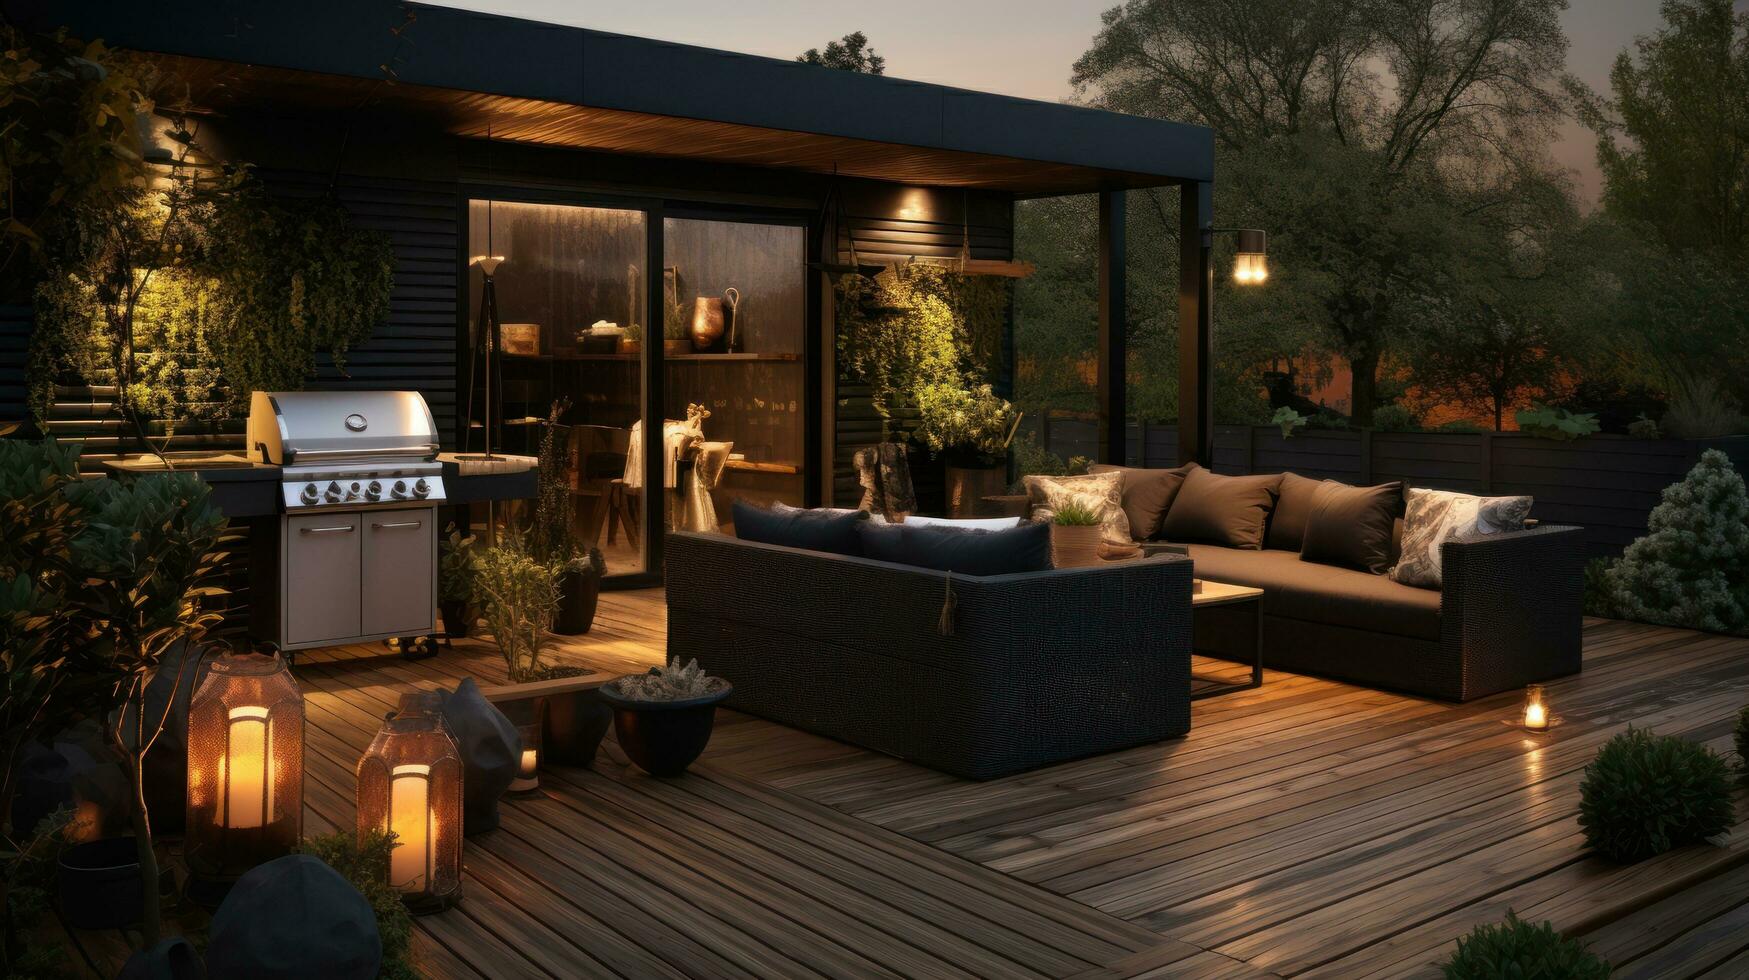 A black outdoor kitchen with plants on the deck photo